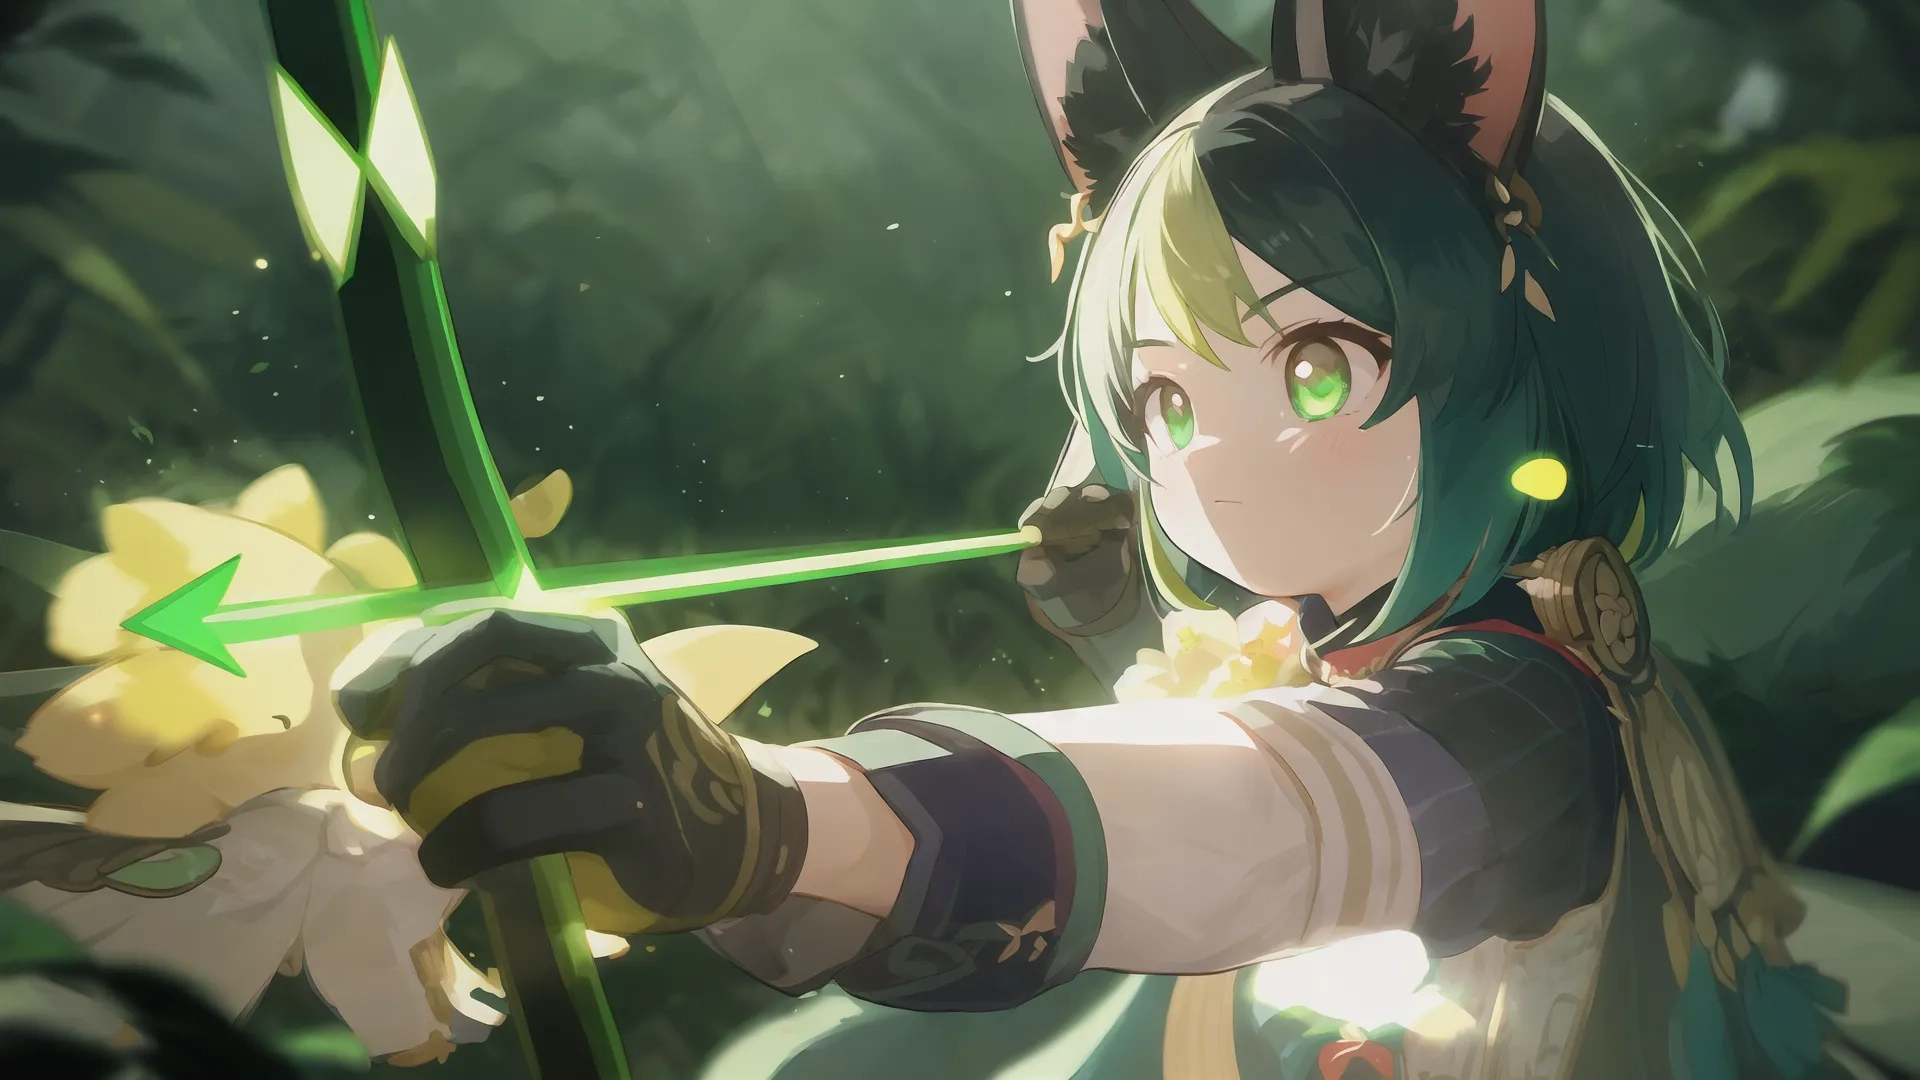 anime style girl with white hair is holding bows and arrows in the jungle with bright yellow flowers while holding her hands crossed up with her fore hand to the bow
